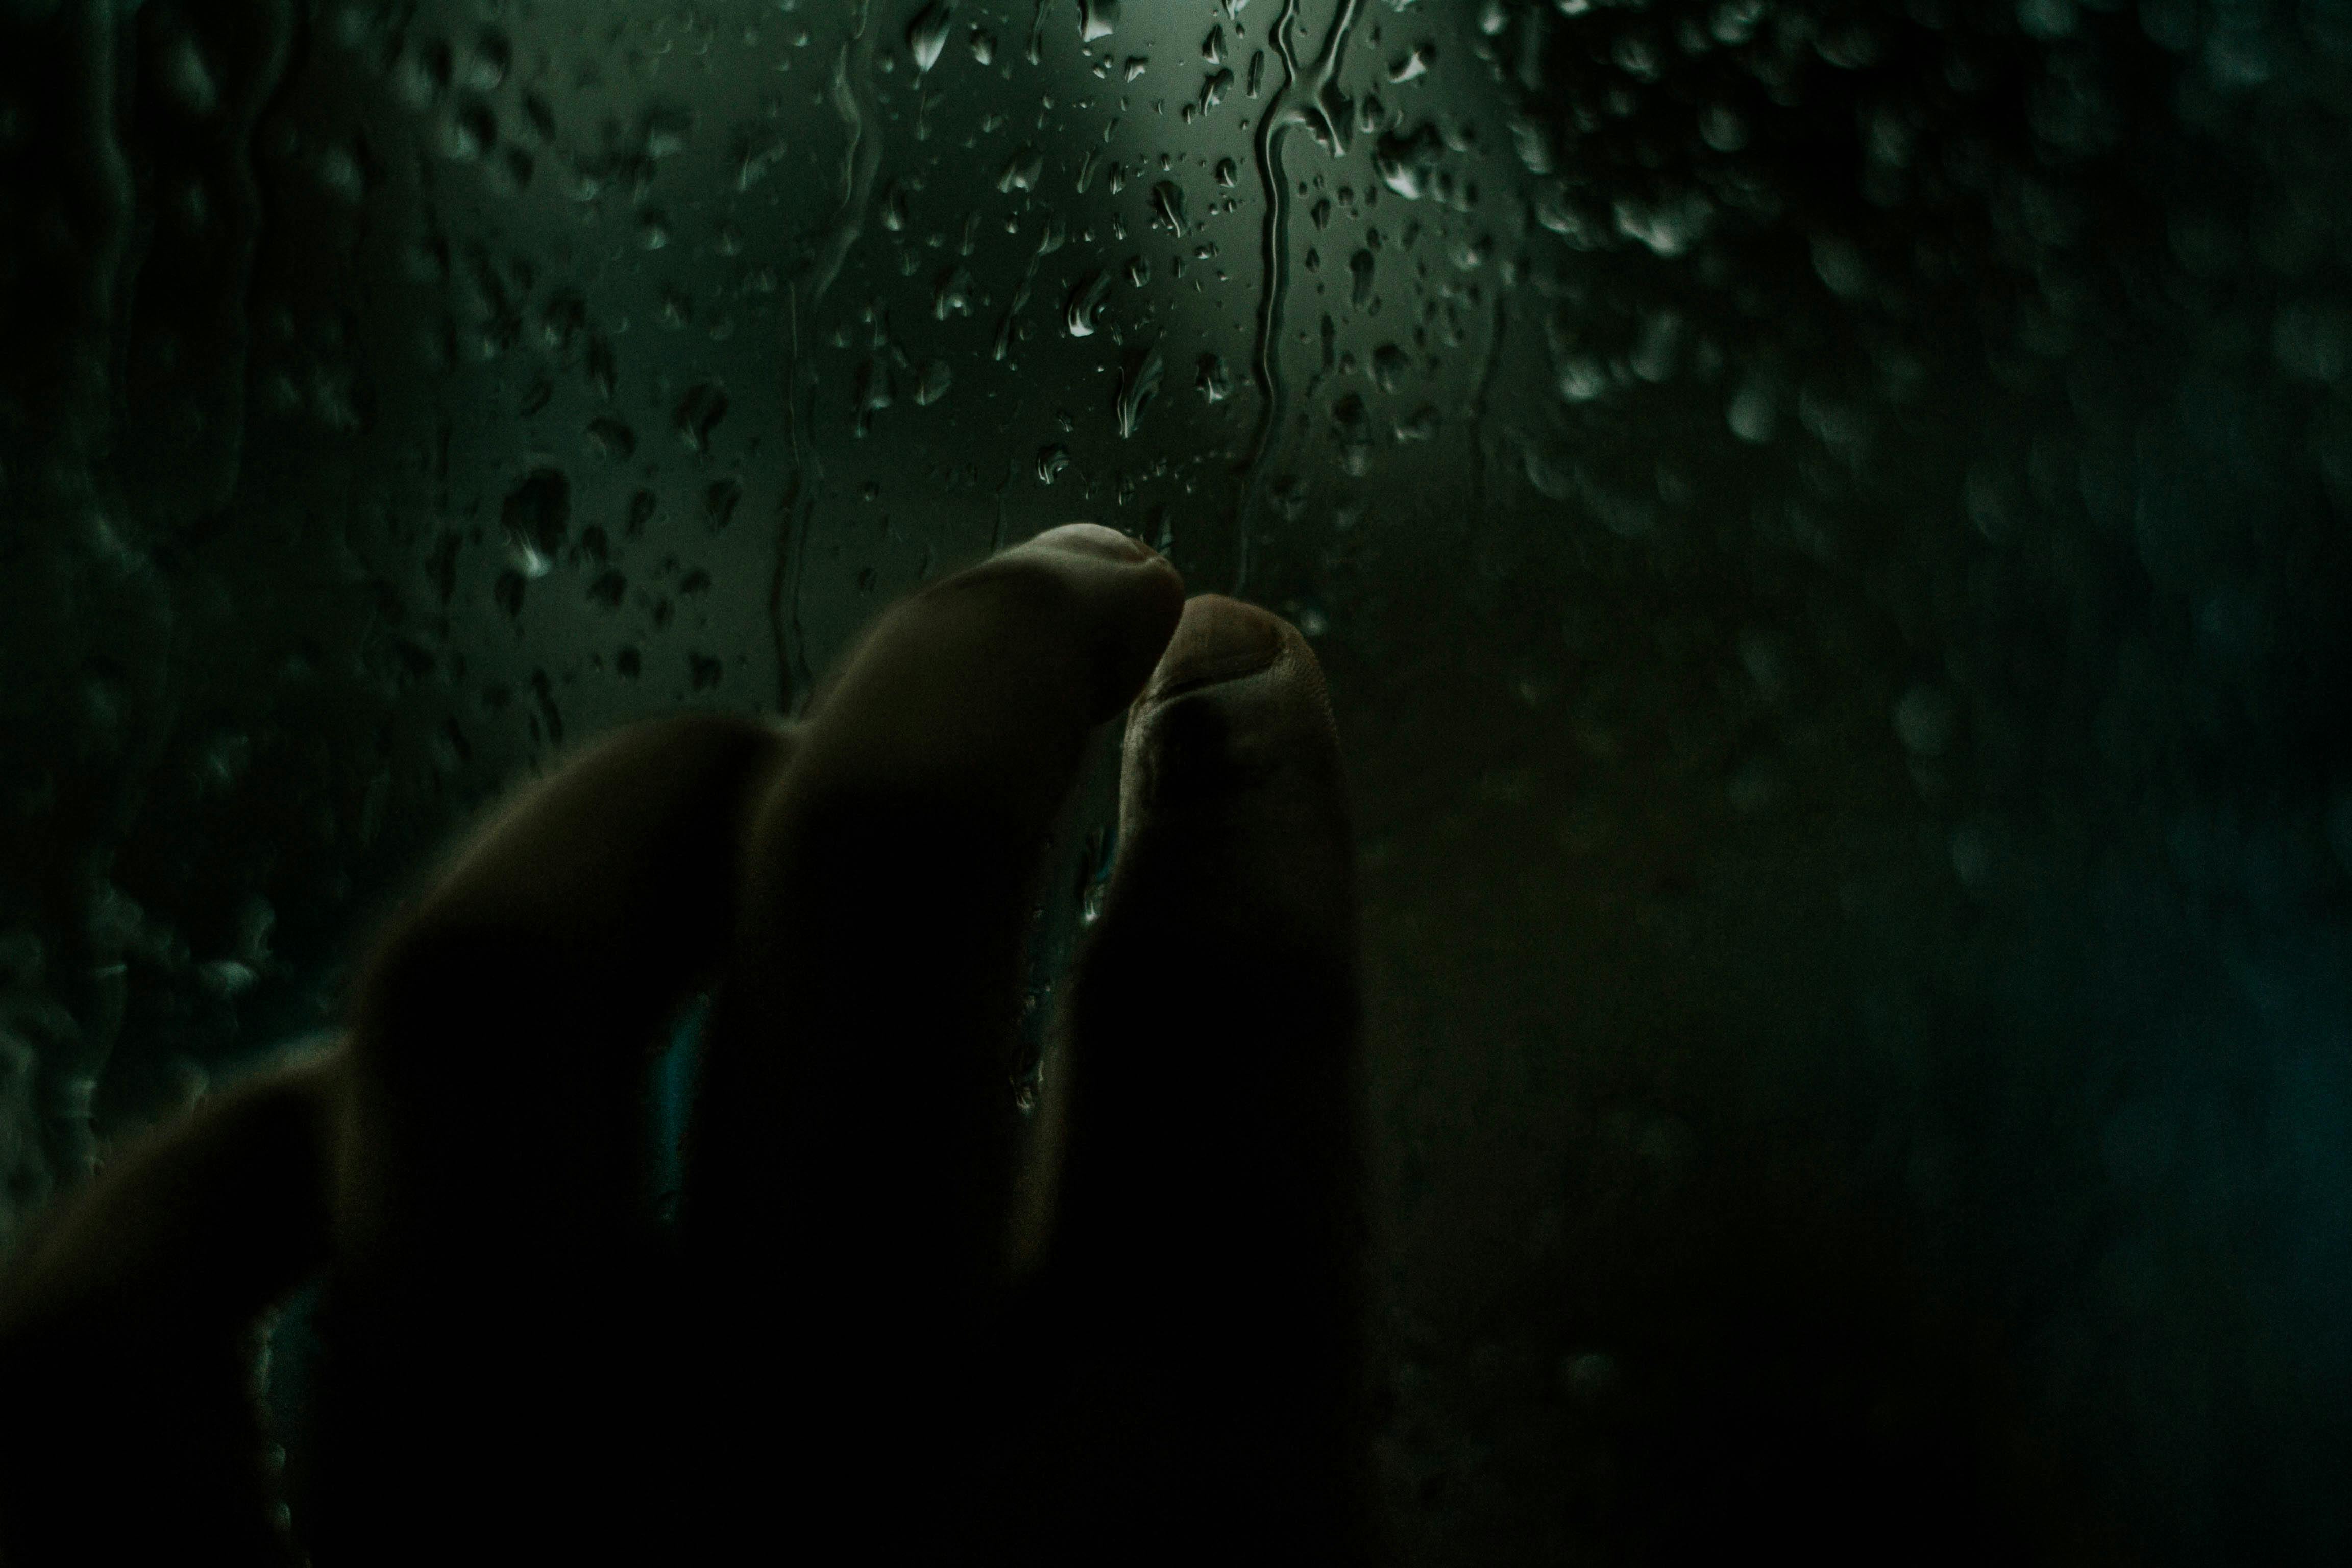 Person Touching Window With Dripping Water · Free Stock Photo